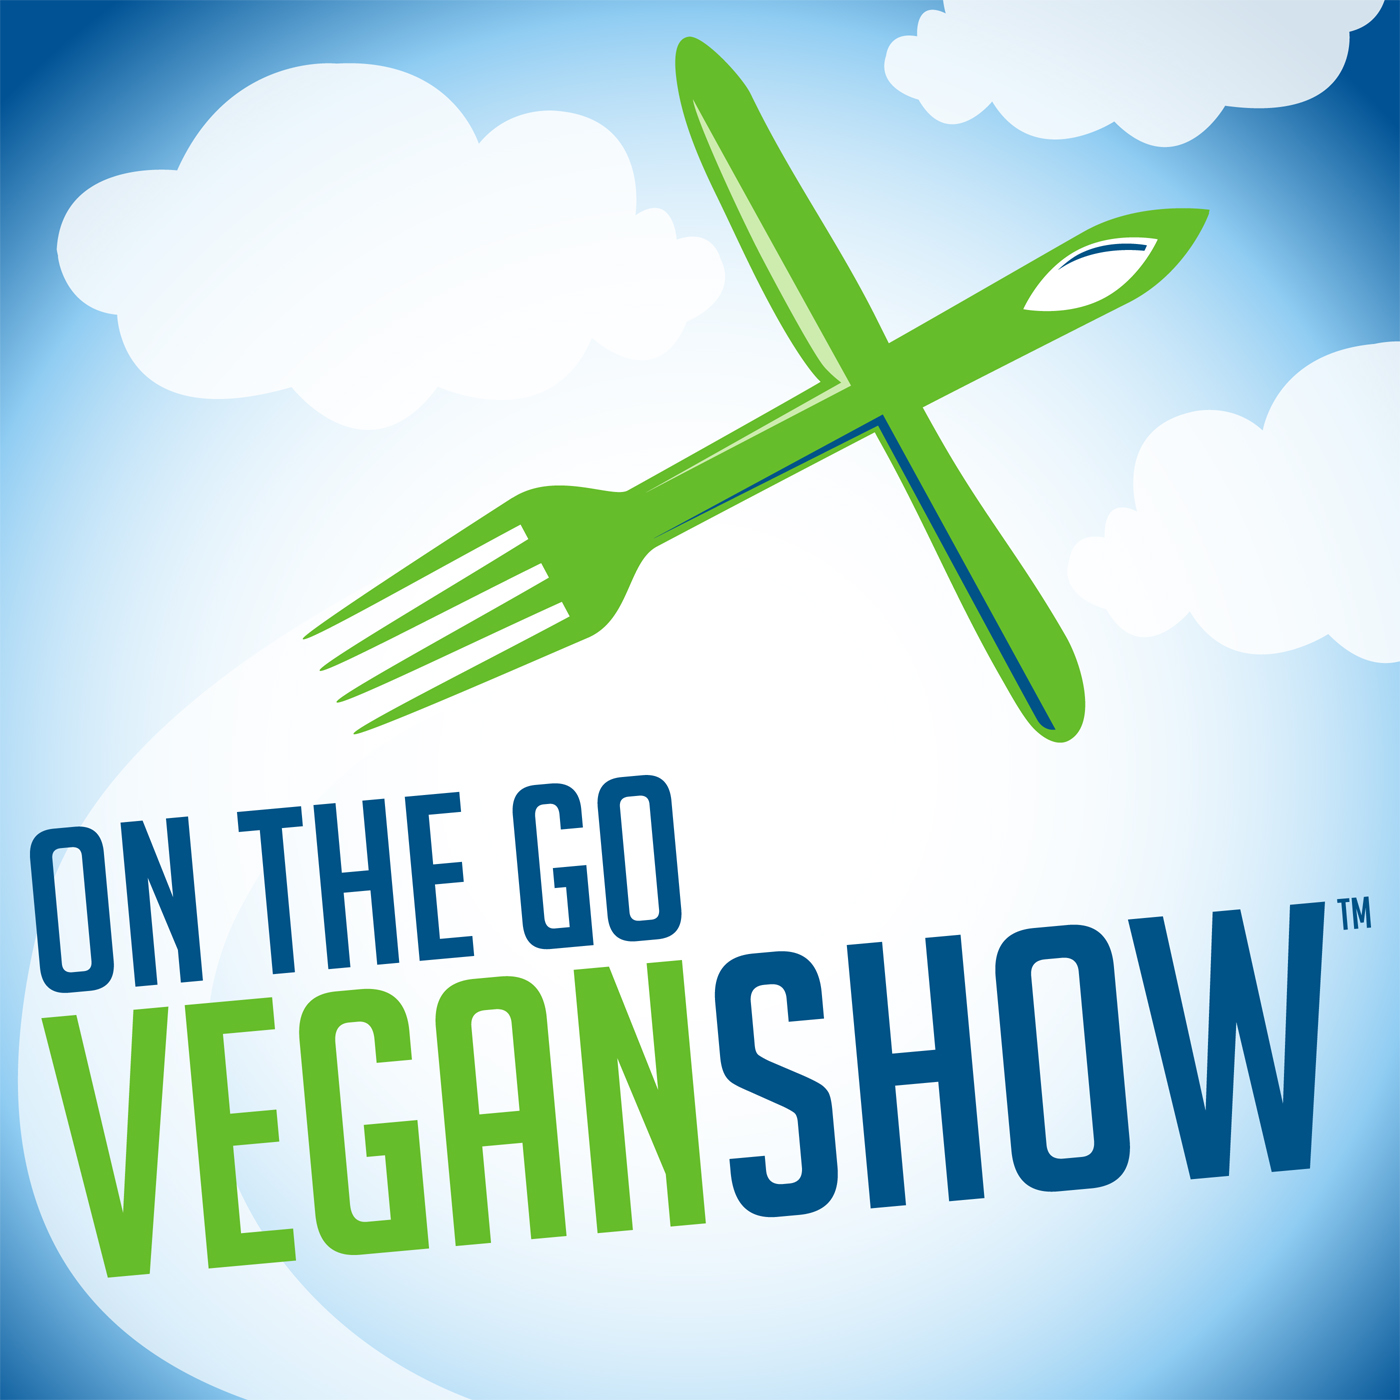 On The Go Vegan Show: Healthful vegan tips for home and travel from a vegan airline pilot.  Motivating restaurants to add labeled healthy vegan menu food items.